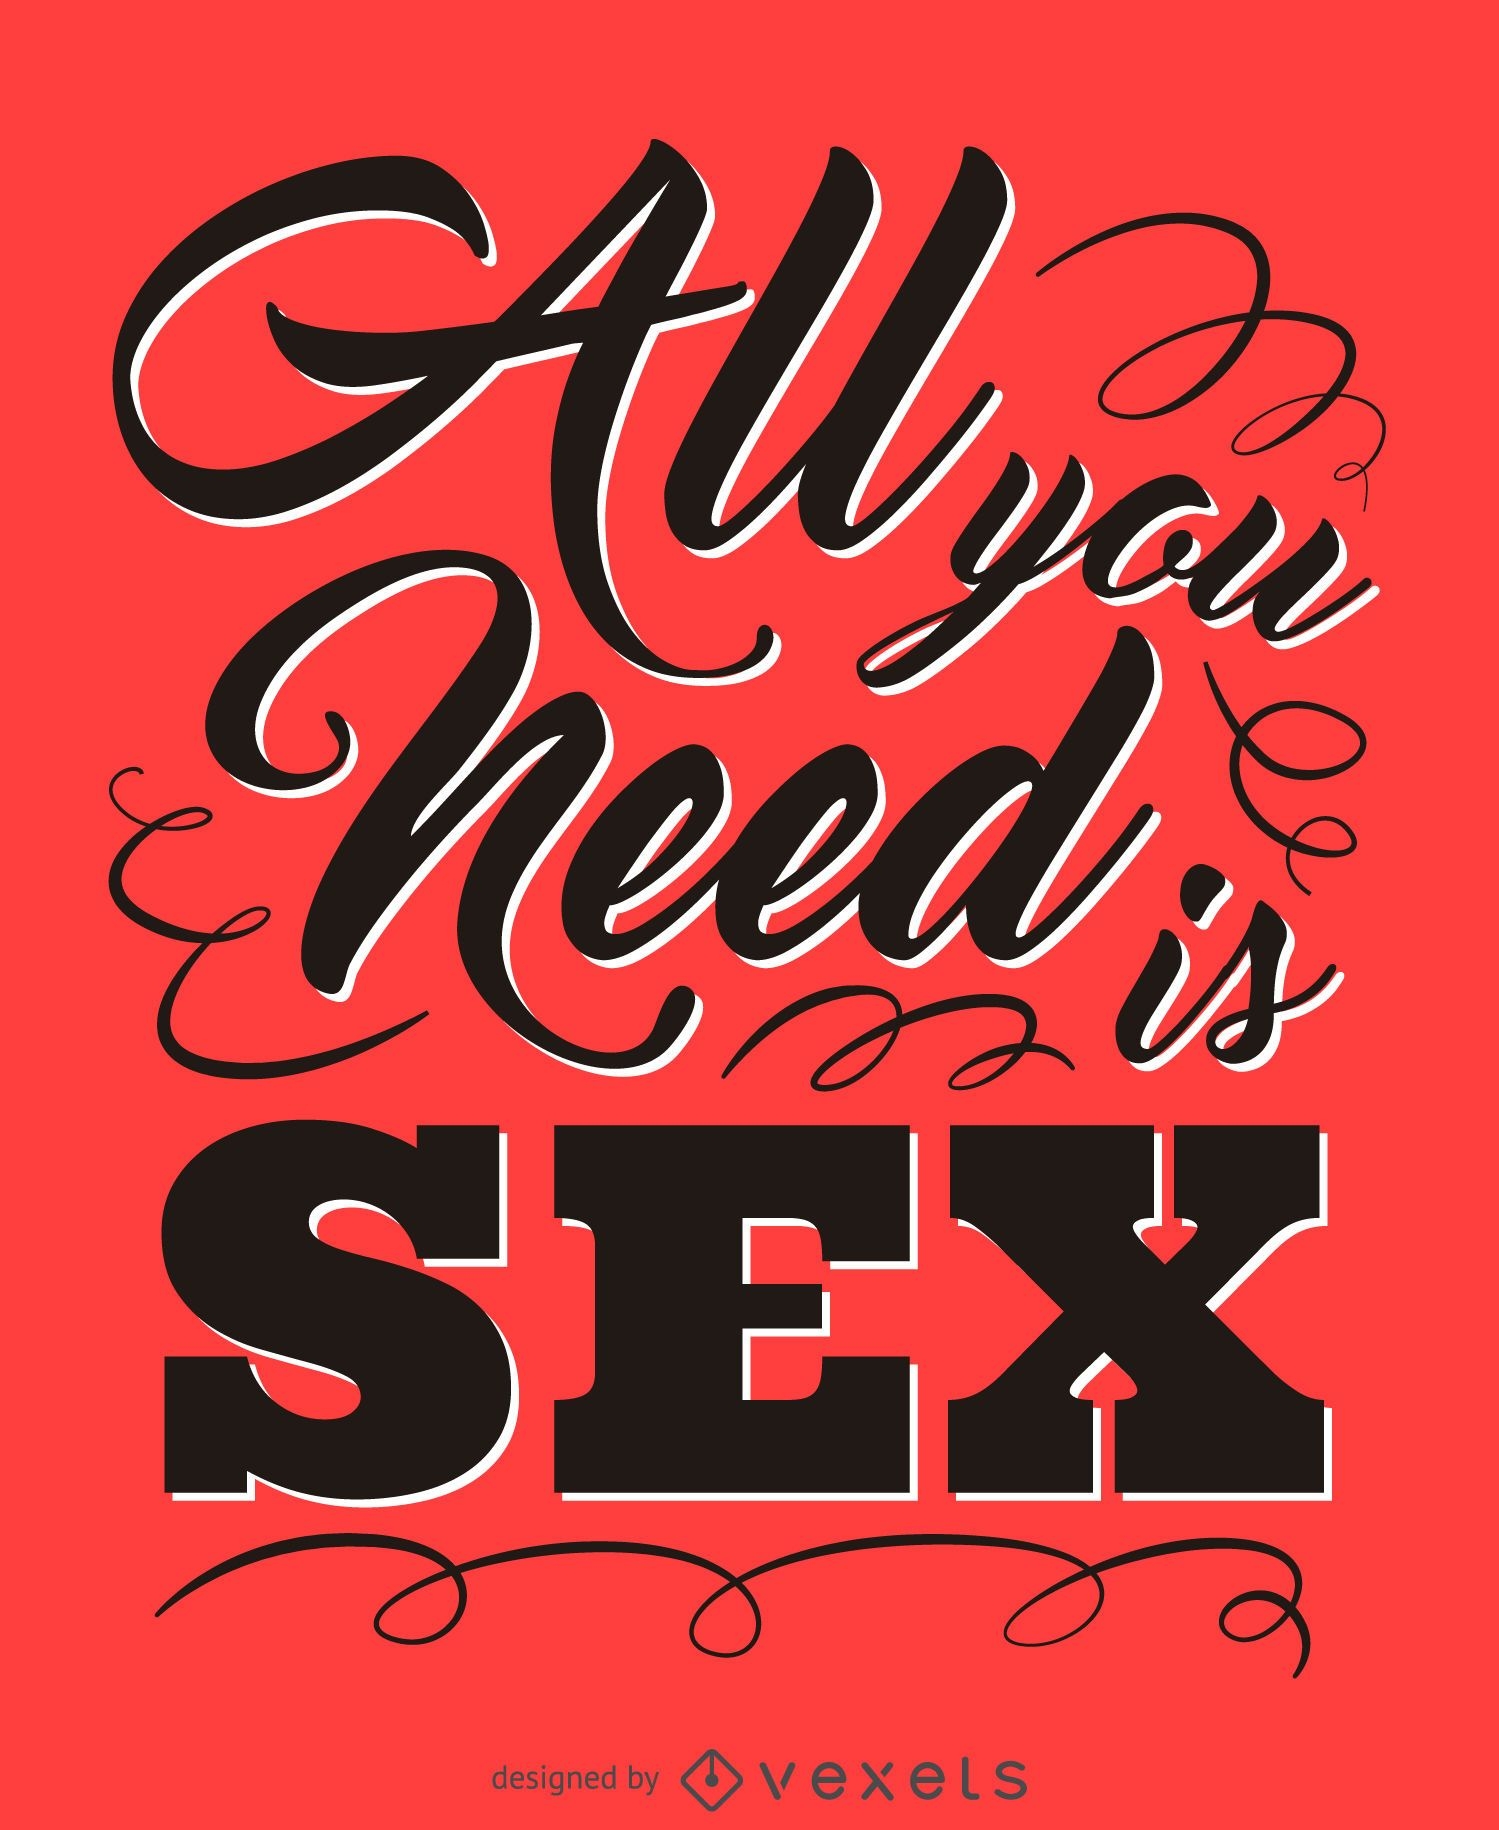 All you need is sex poster